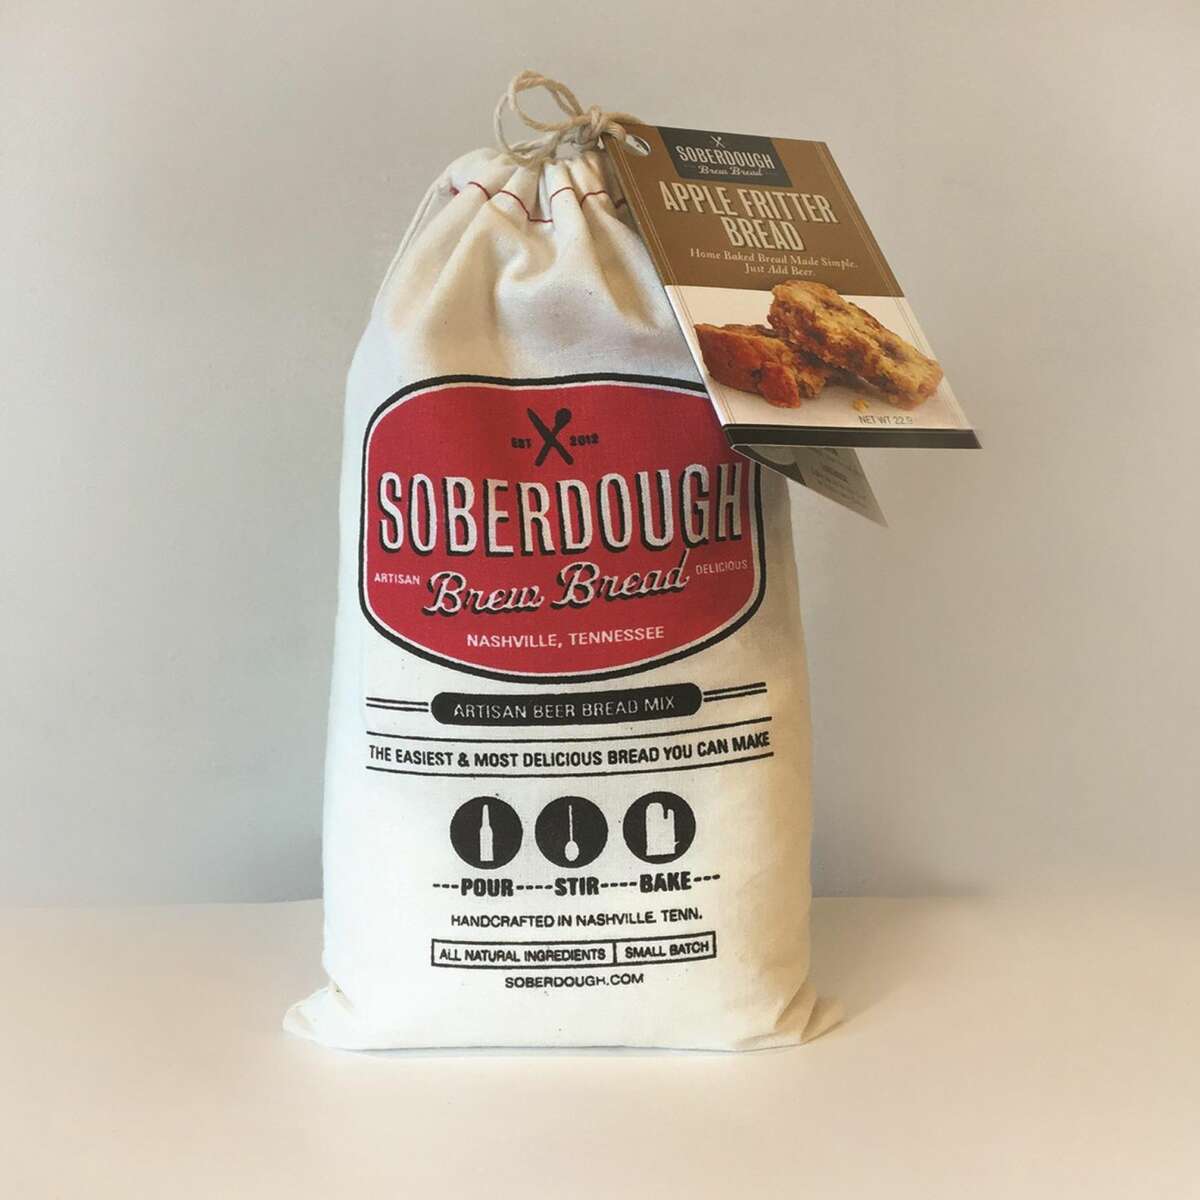 Soberdough Brew Bread. Simply add 12 ounces of beer to any of the all- natural mixes